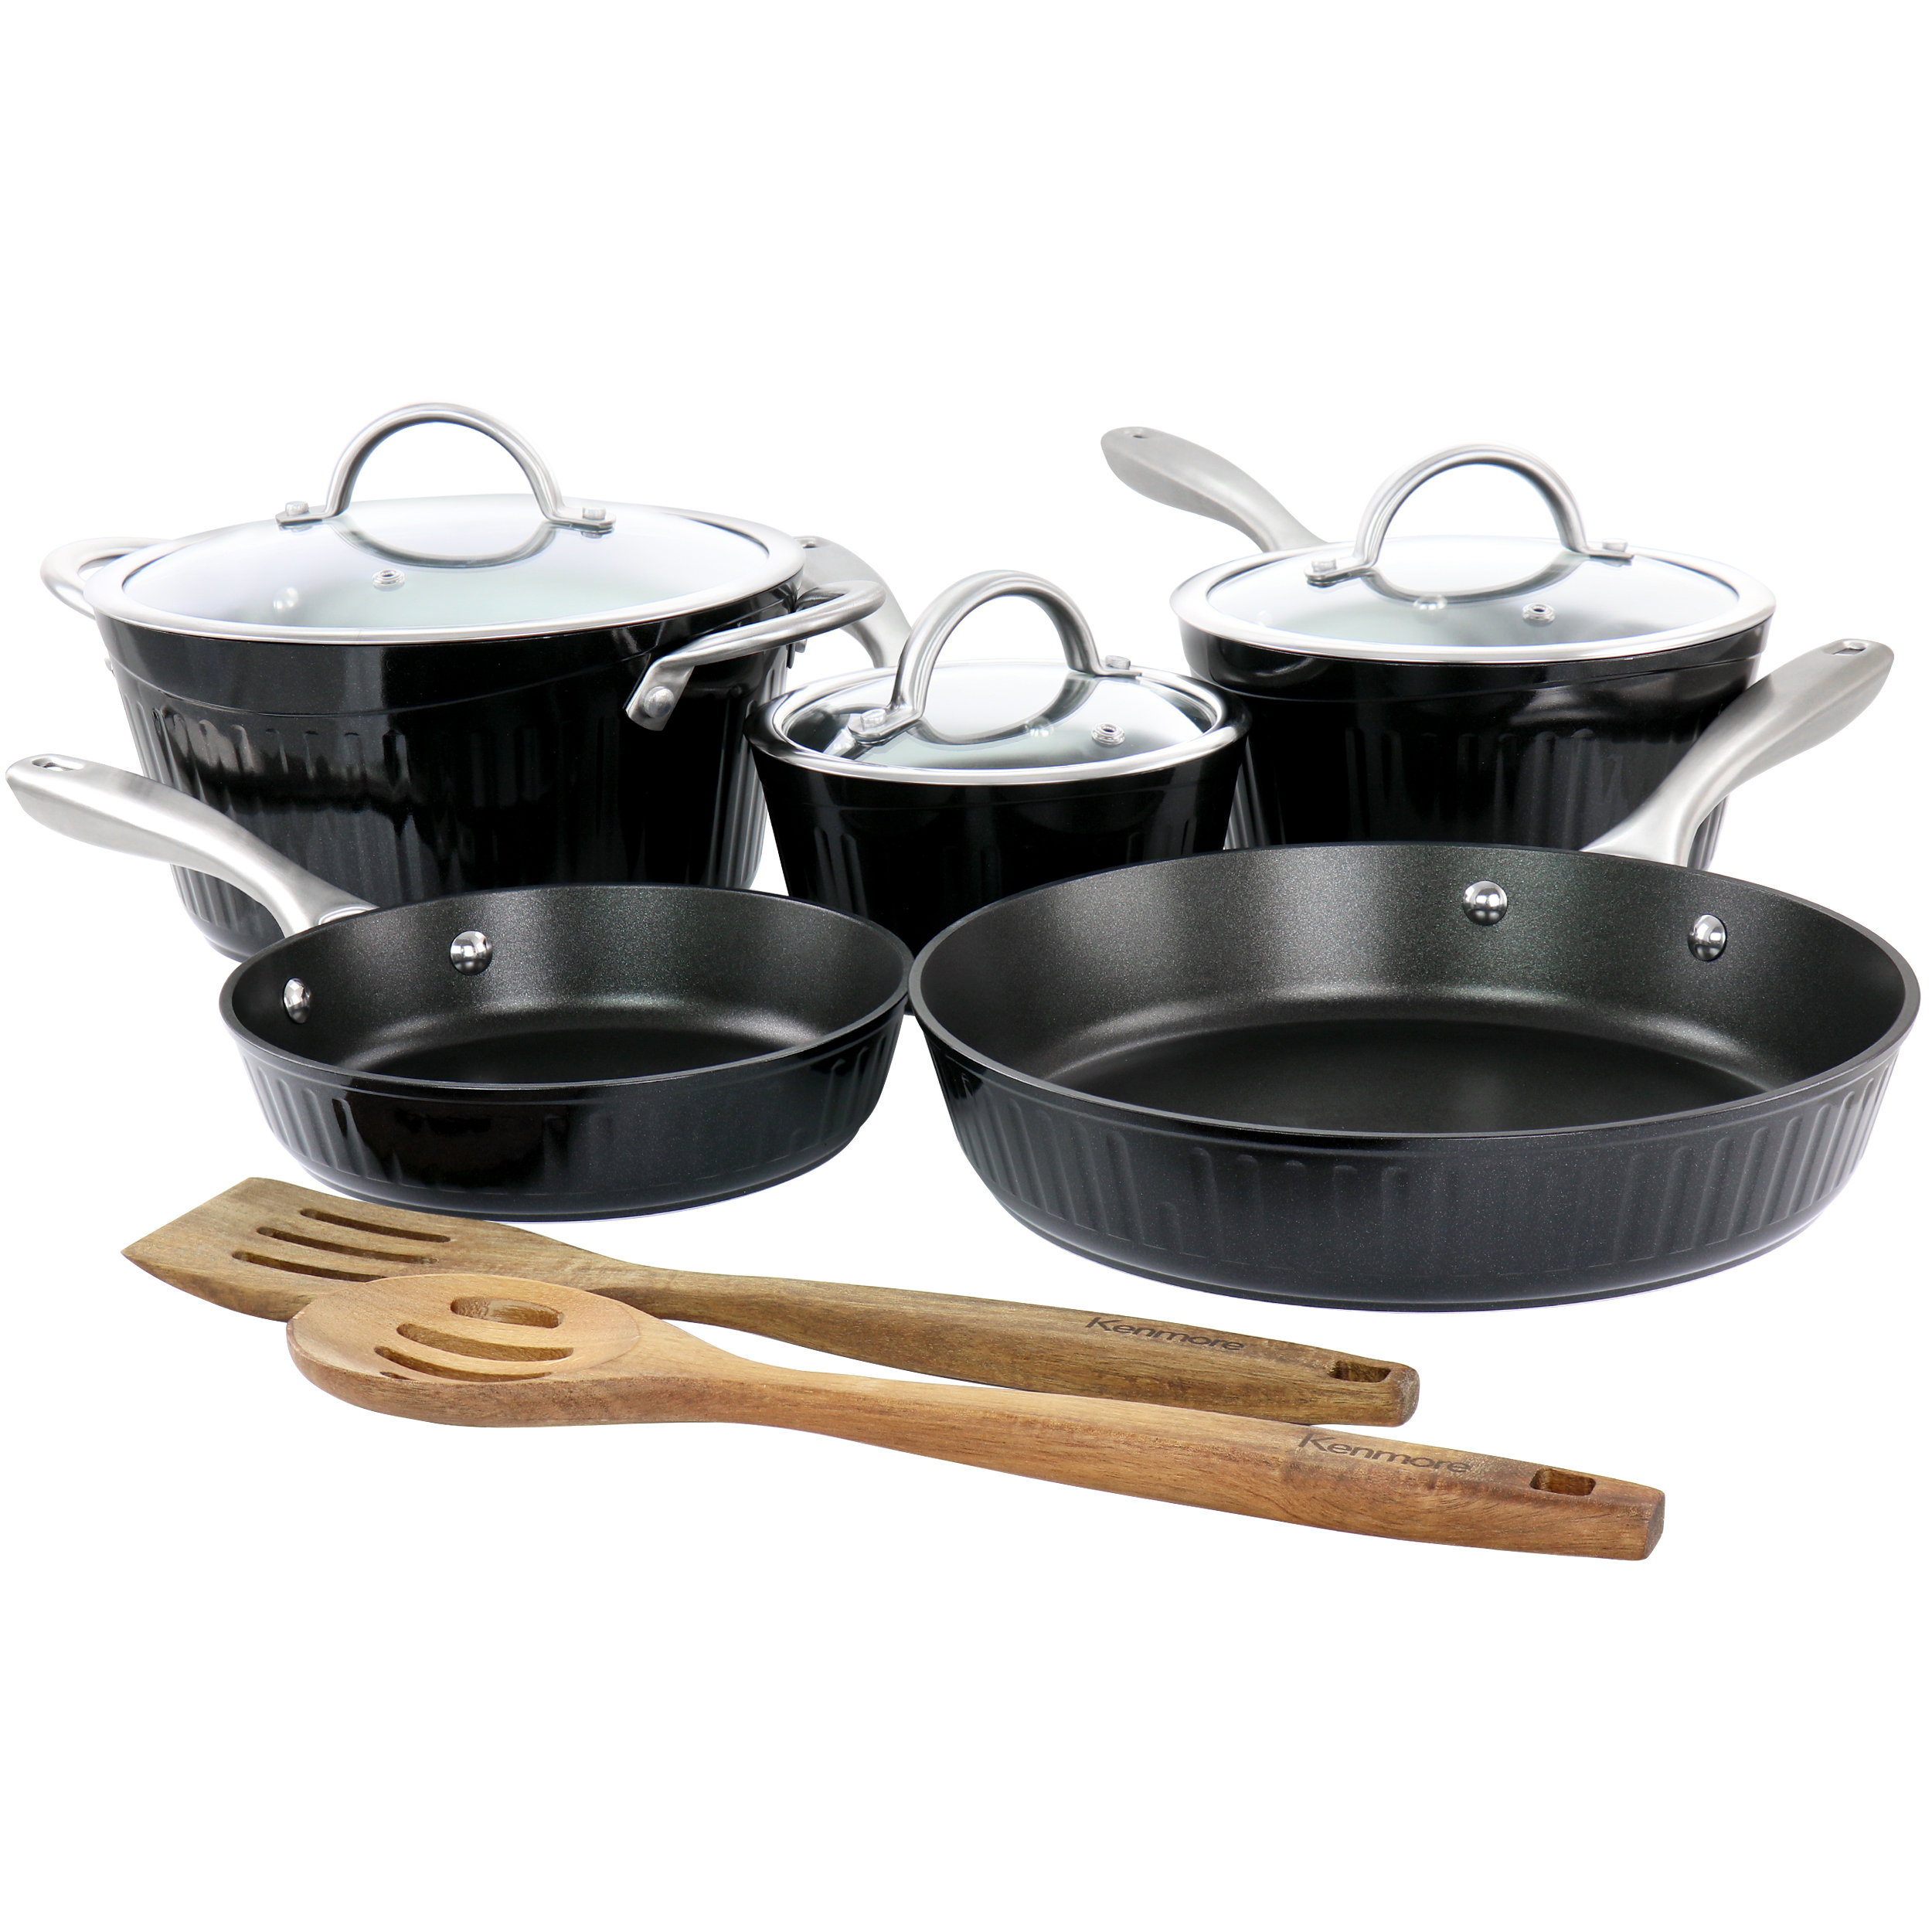 Is There Any Scratch-Free Cookware? Find Out Now!